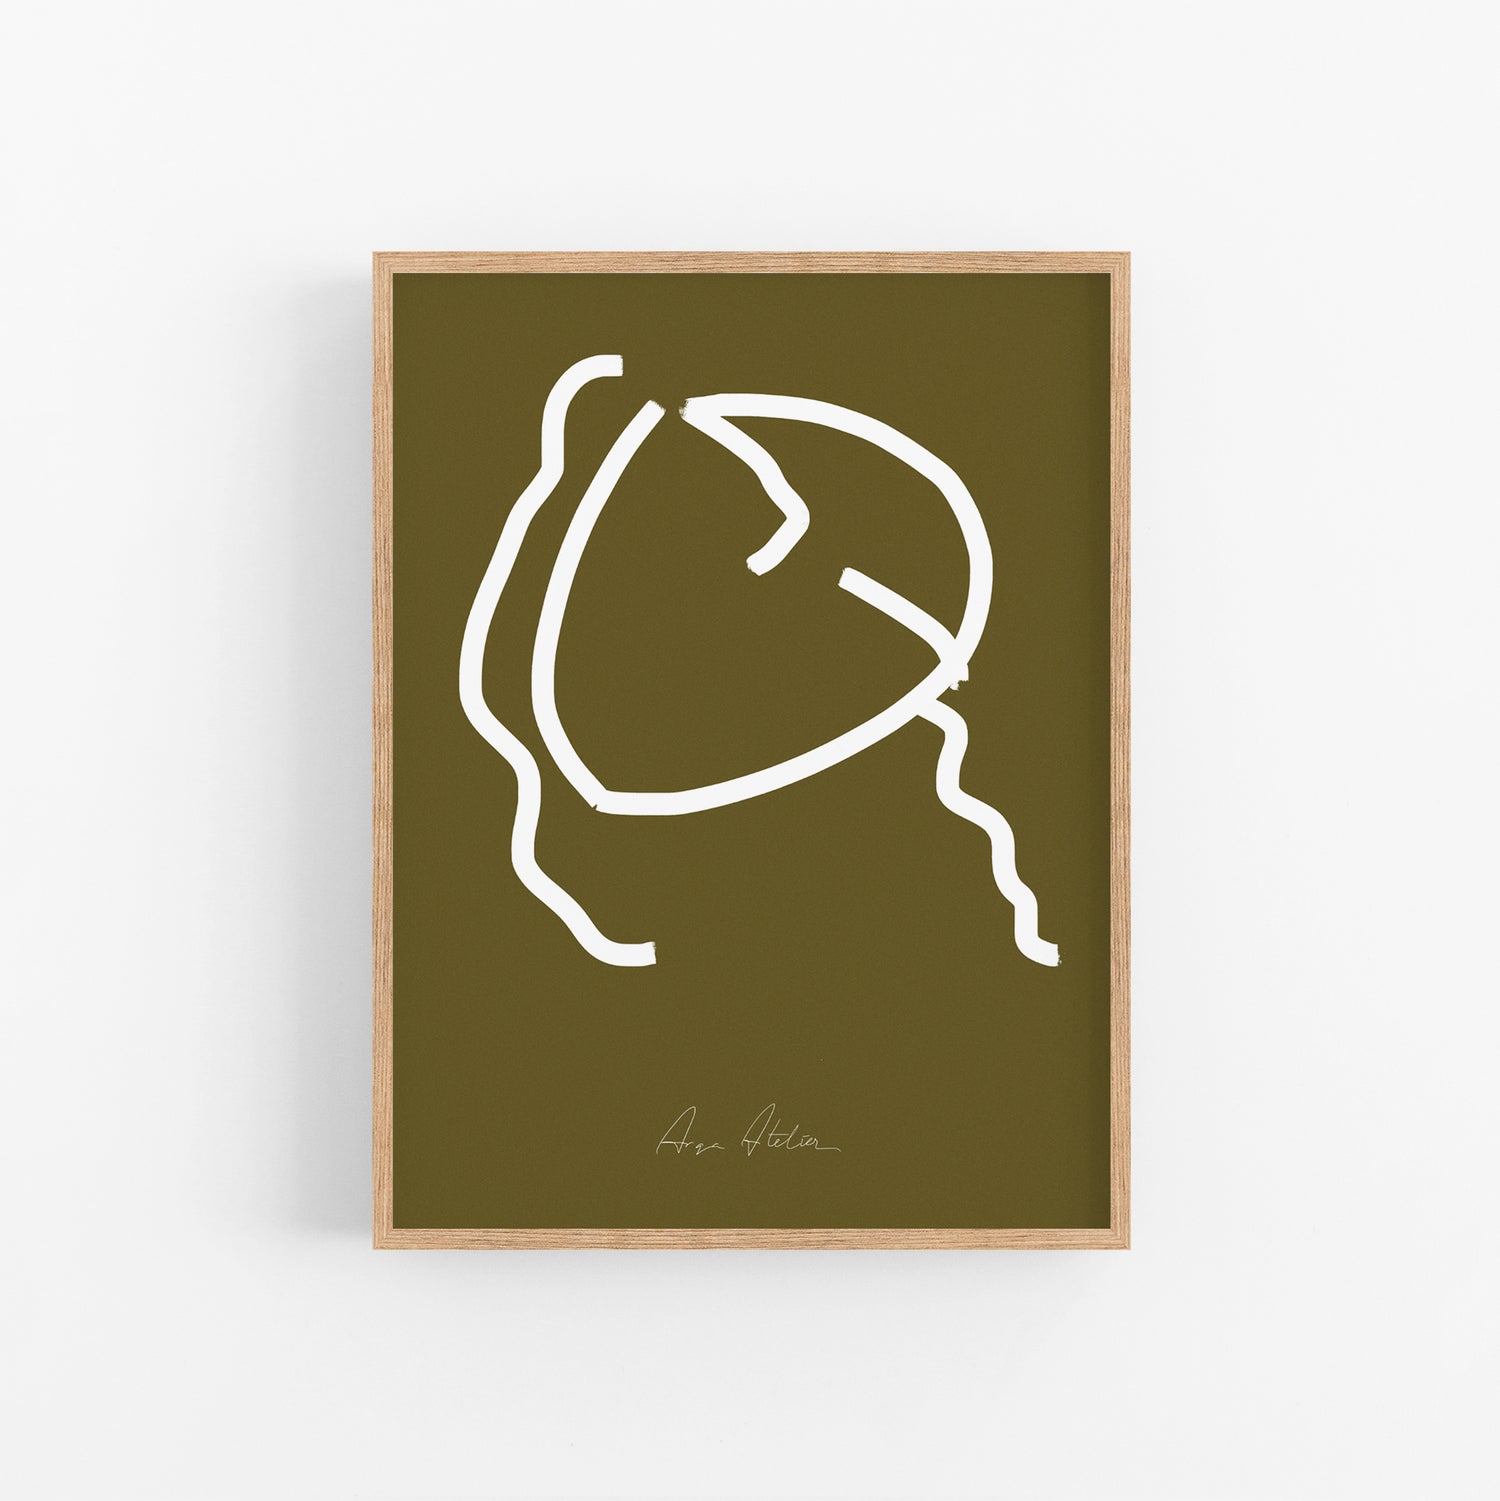 Contemporary abstract female figure print. Minimalist wall art in olive green and white color.